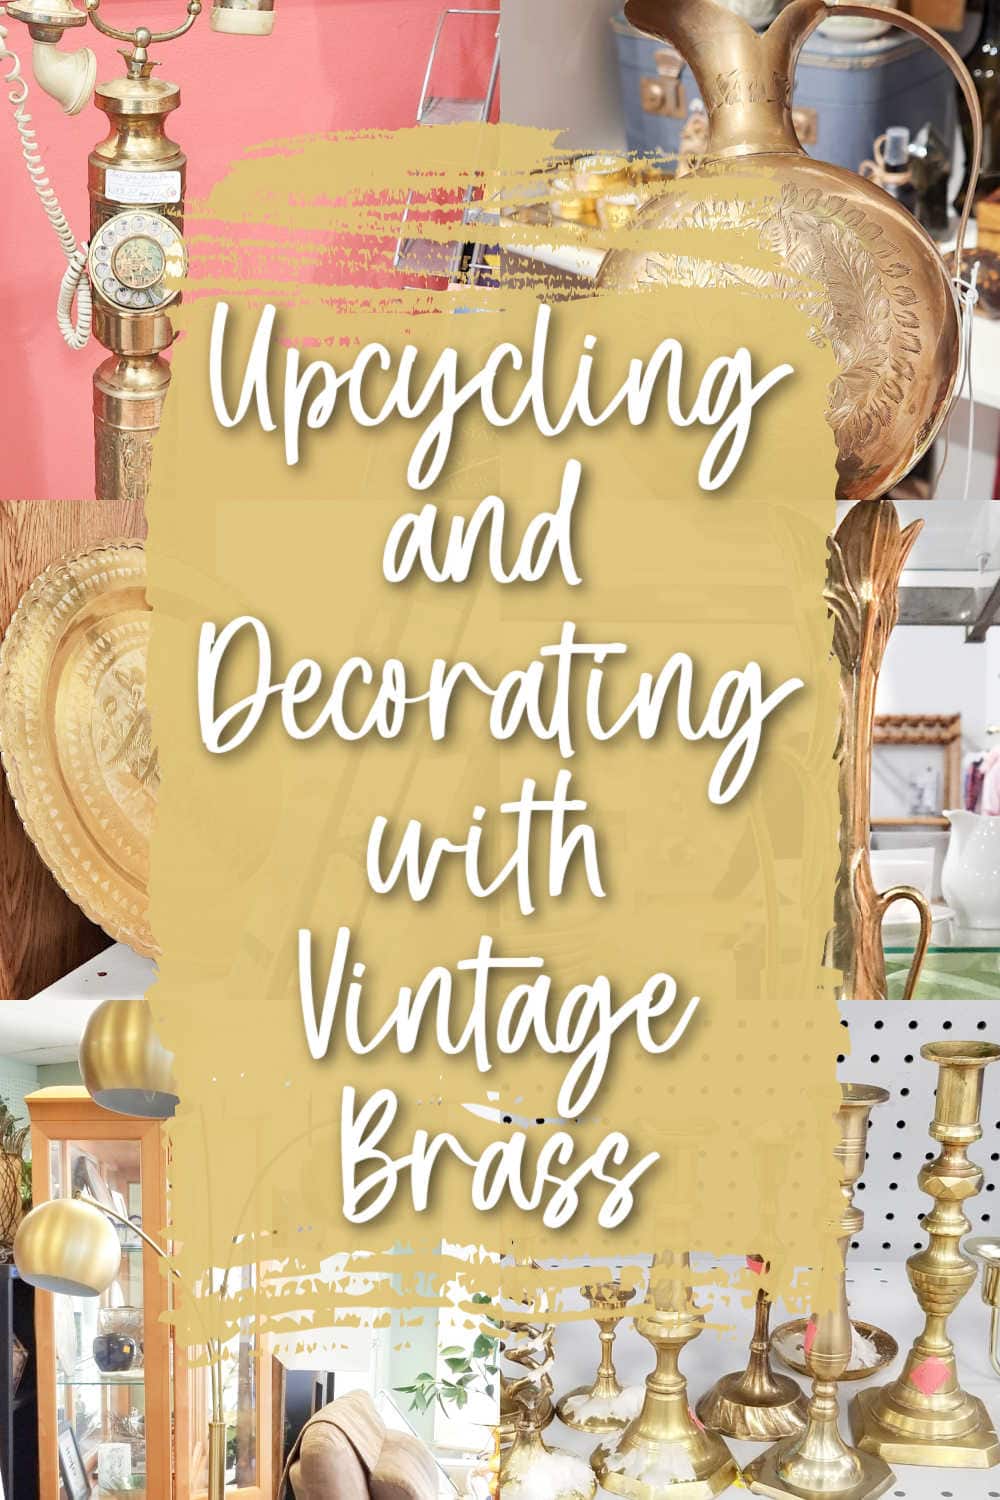 upcycle ideas for vintage brass lamp, candle holders, and more